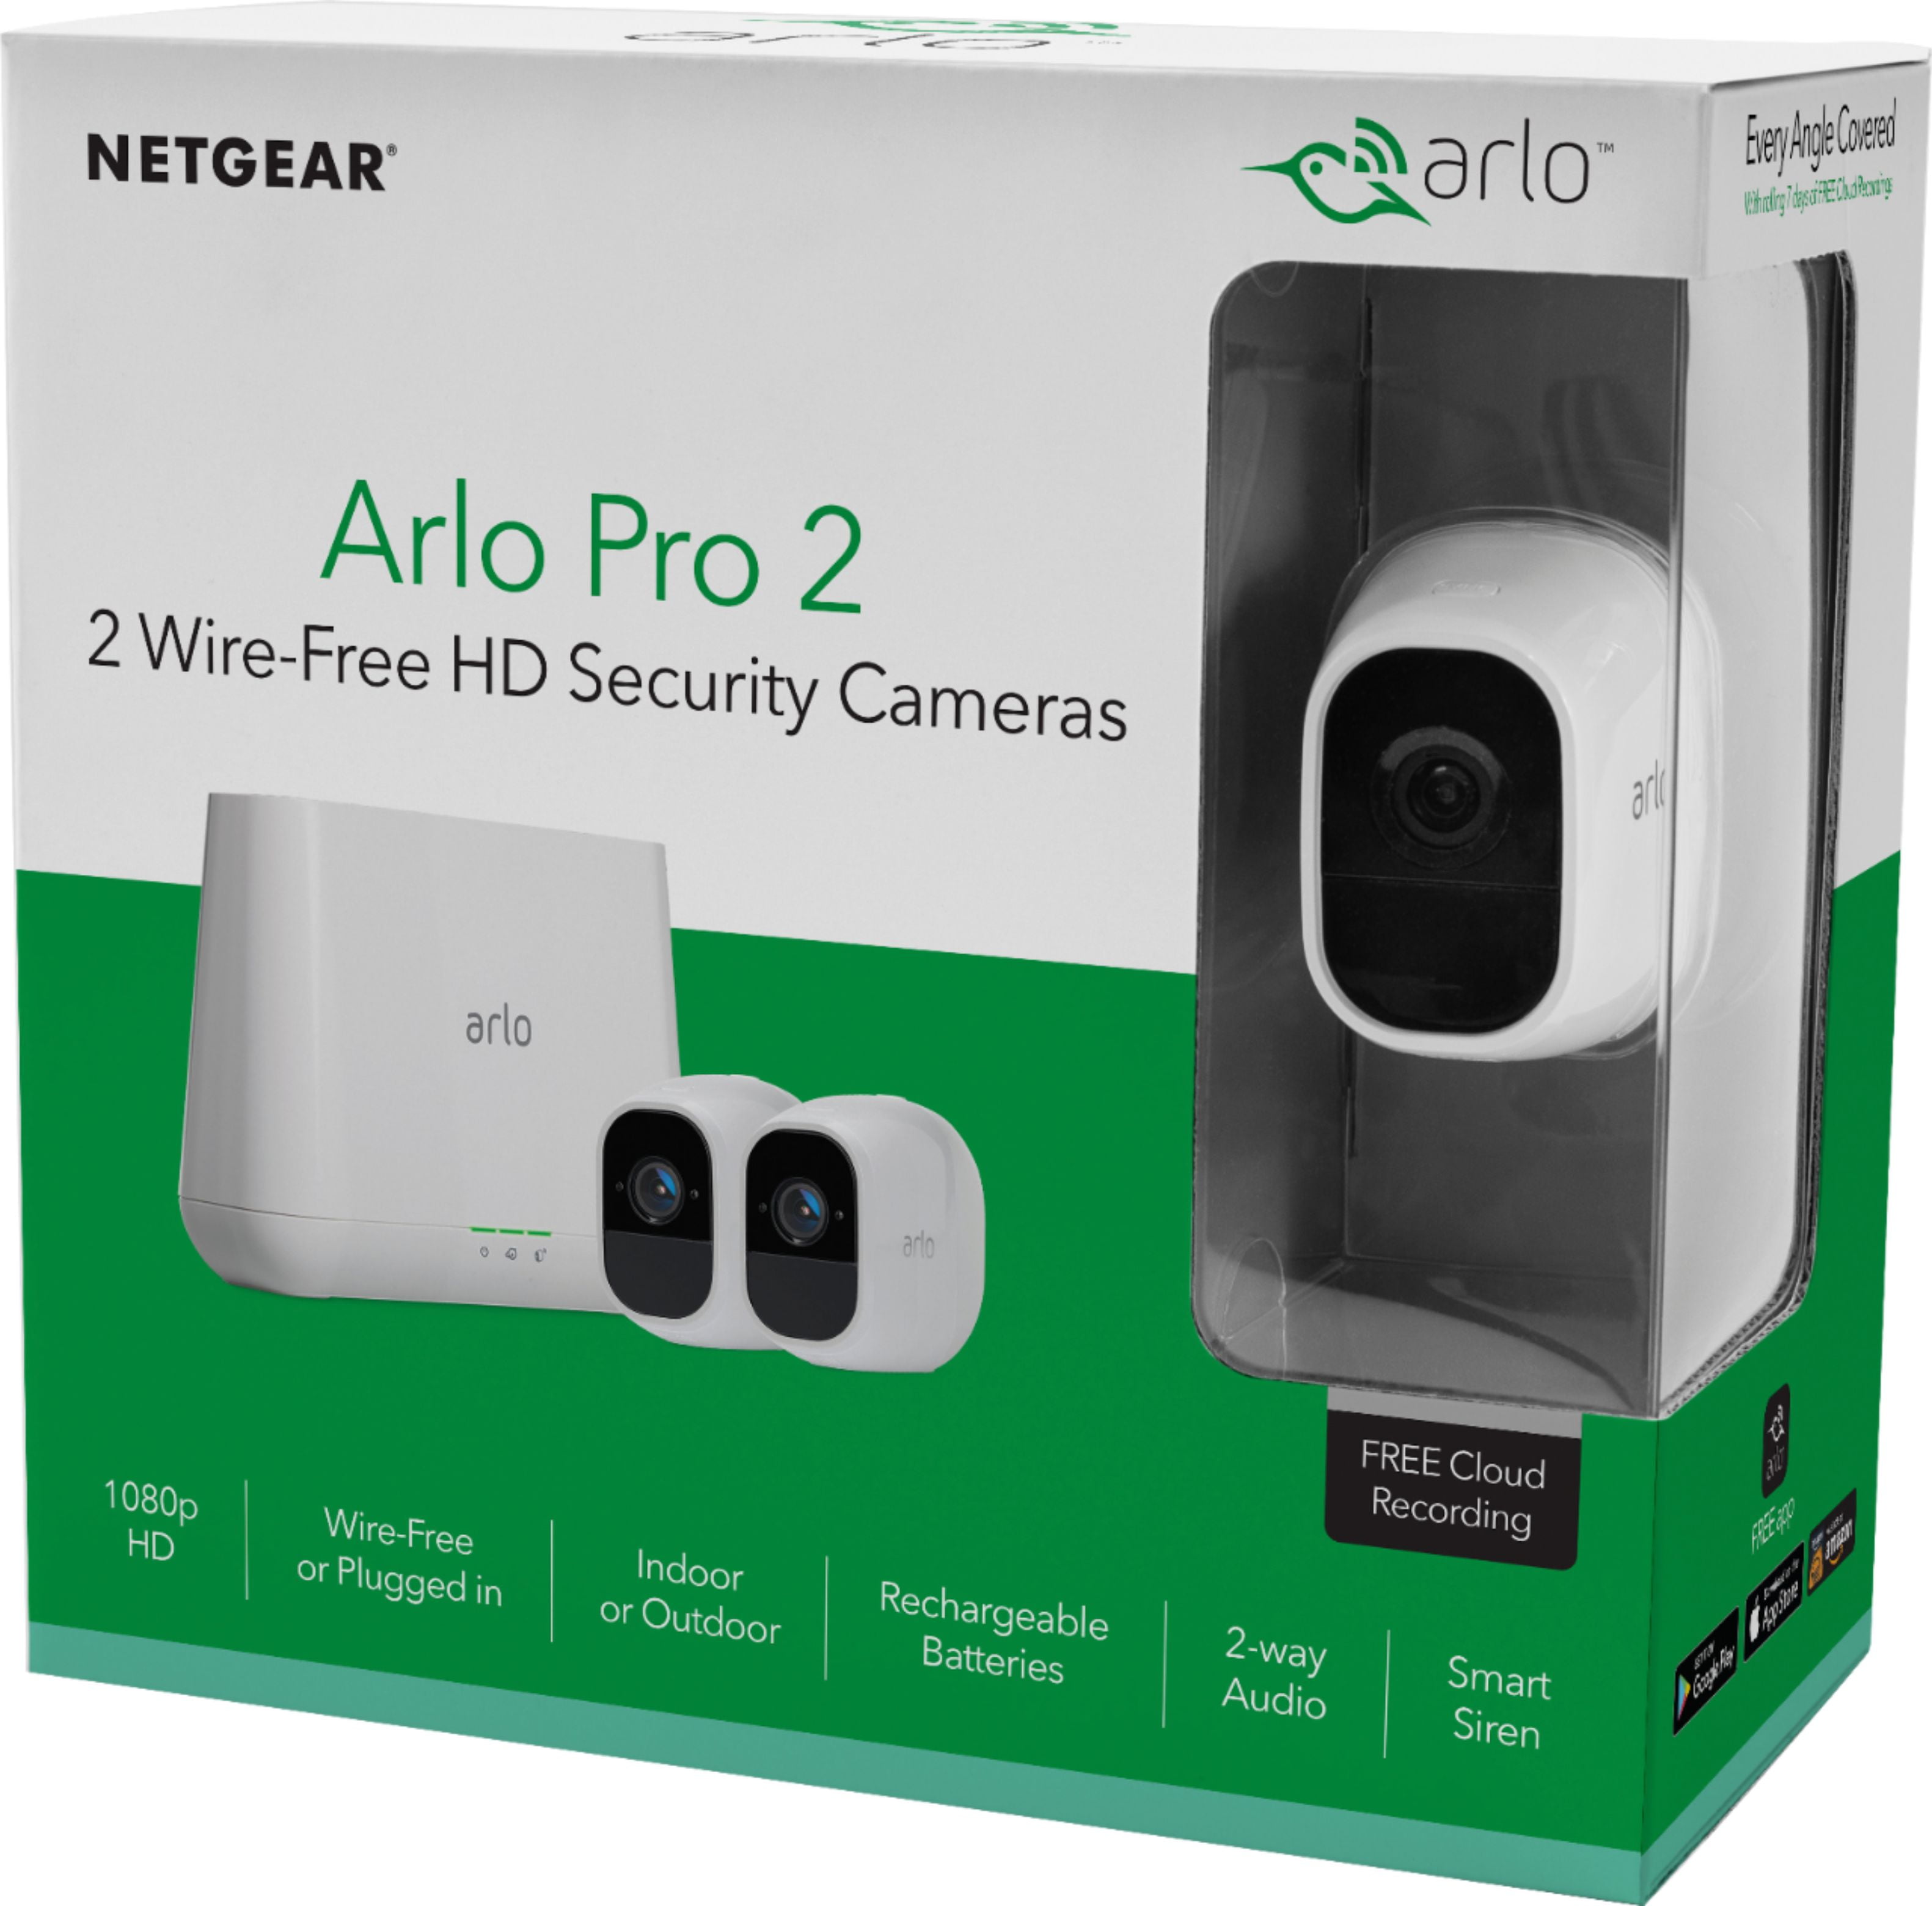 pris klodset belastning Arlo Pro 2 1080P HD Security Camera System VMS4230P - 2 Wire-Free  Rechargeable Battery Cameras with Two-Way Audio, Indoor/Outdoor, Night  Vision, Motion Detection, Activity Zones, 3-Second Look Back - Walmart.com